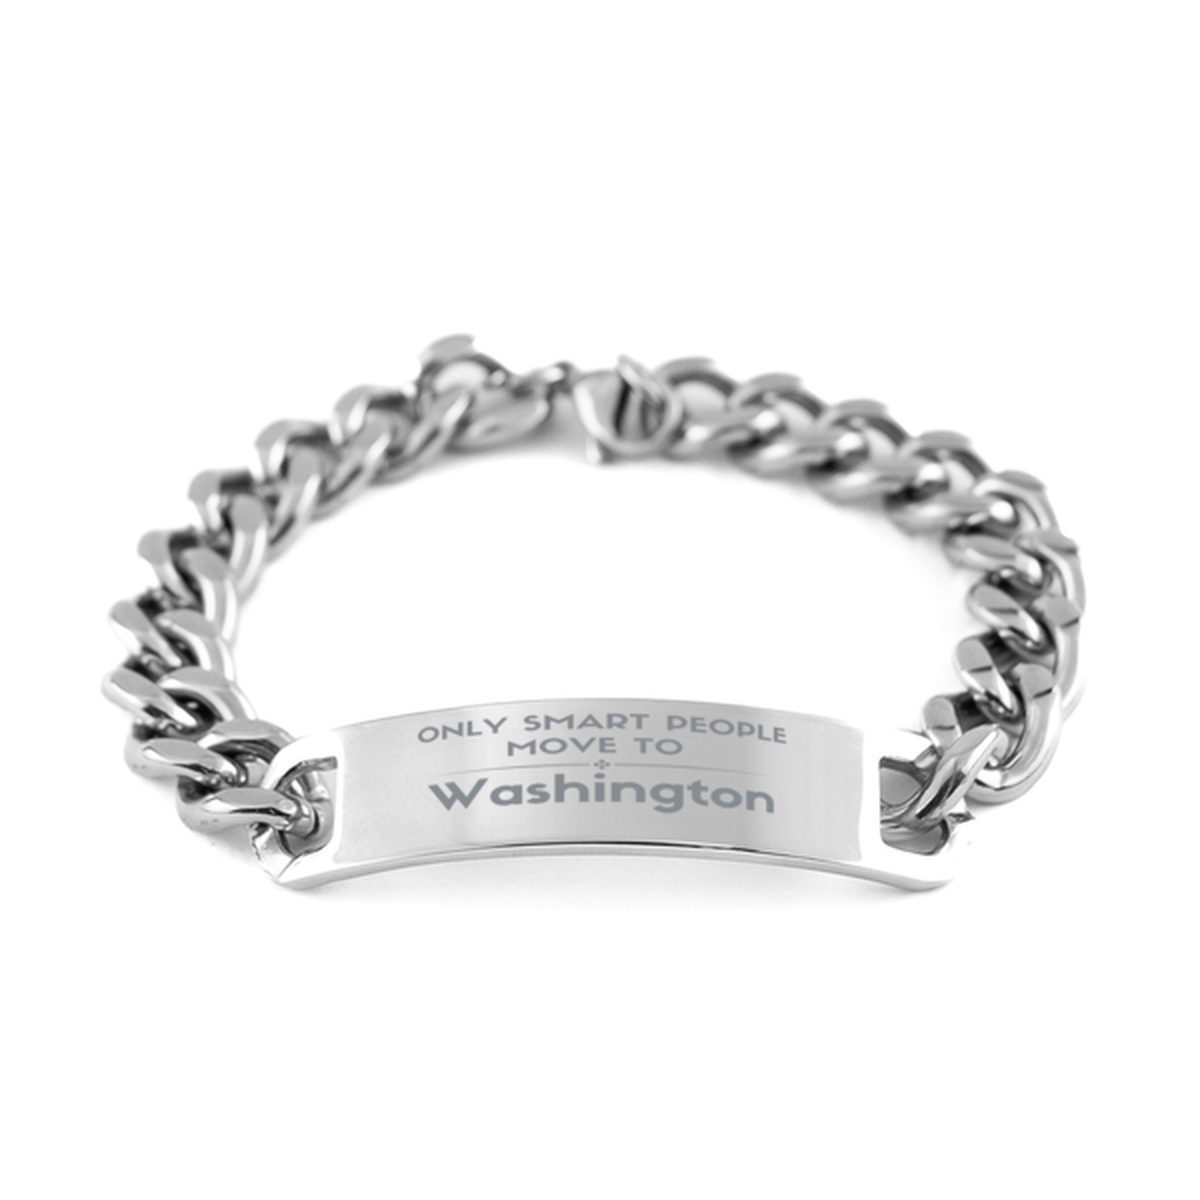 Only smart people move to Washington Cuban Chain Stainless Steel Bracelet, Gag Gifts For Washington, Move to Washington Gifts for Friends Coworker Funny Saying Quote